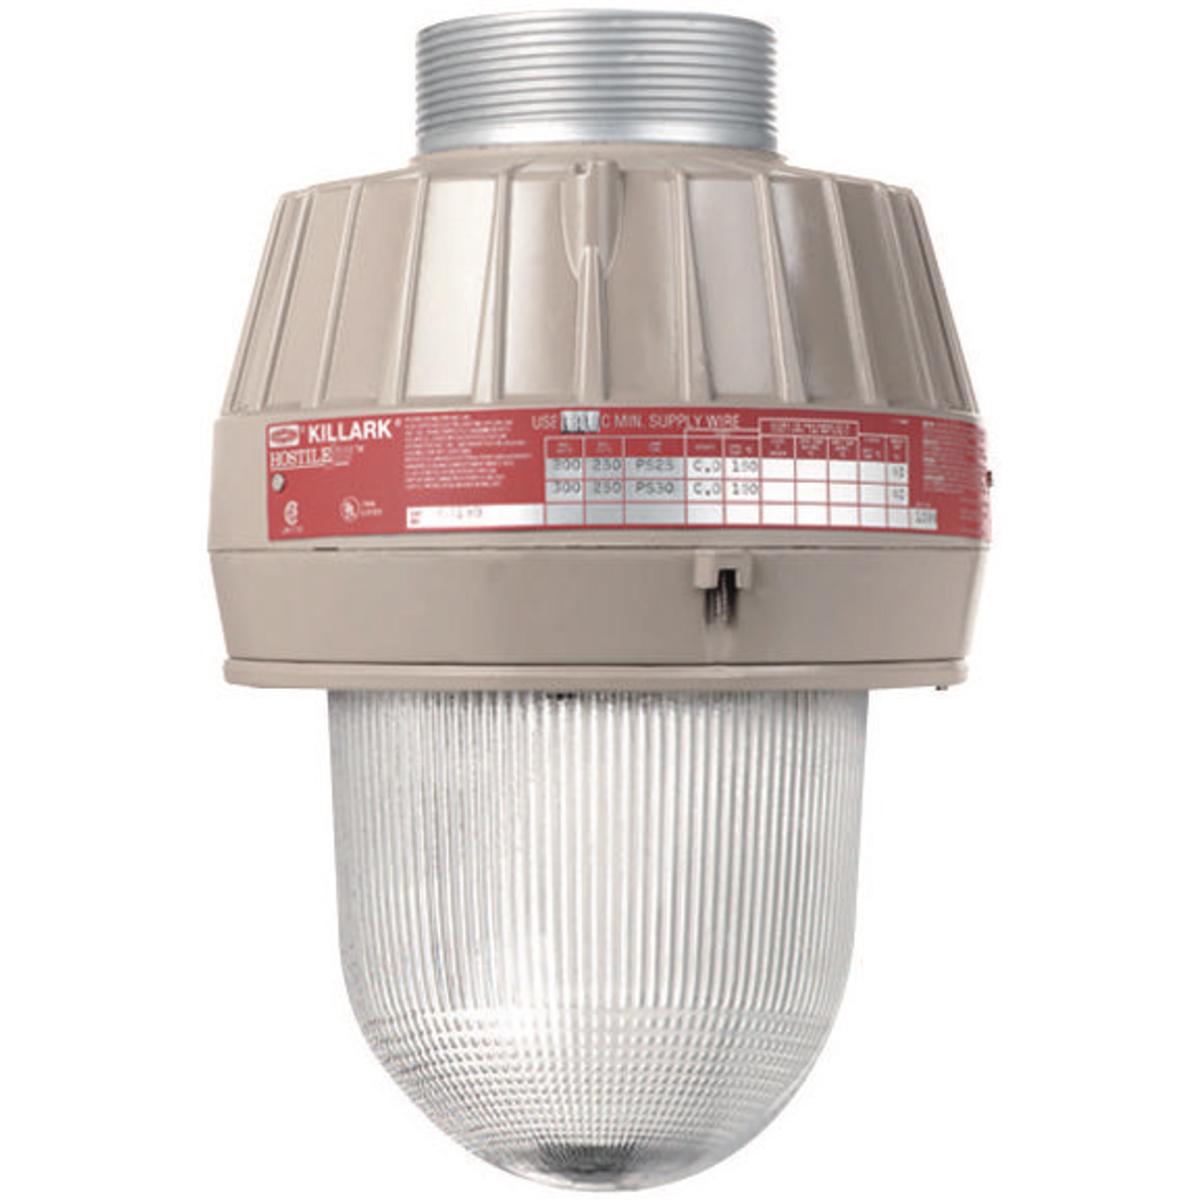 Hubbell EMS075 EM HPS 70W 480V Housing and Globe - Assembled with Lamp  ; Four light sources—Incandescent, compact fluorescent, high pressure sodium and metal halide ; Mounting choice—Pendant, ceiling, 25˚ stanchion or 90˚ wall mount, all with “wireless” design that all